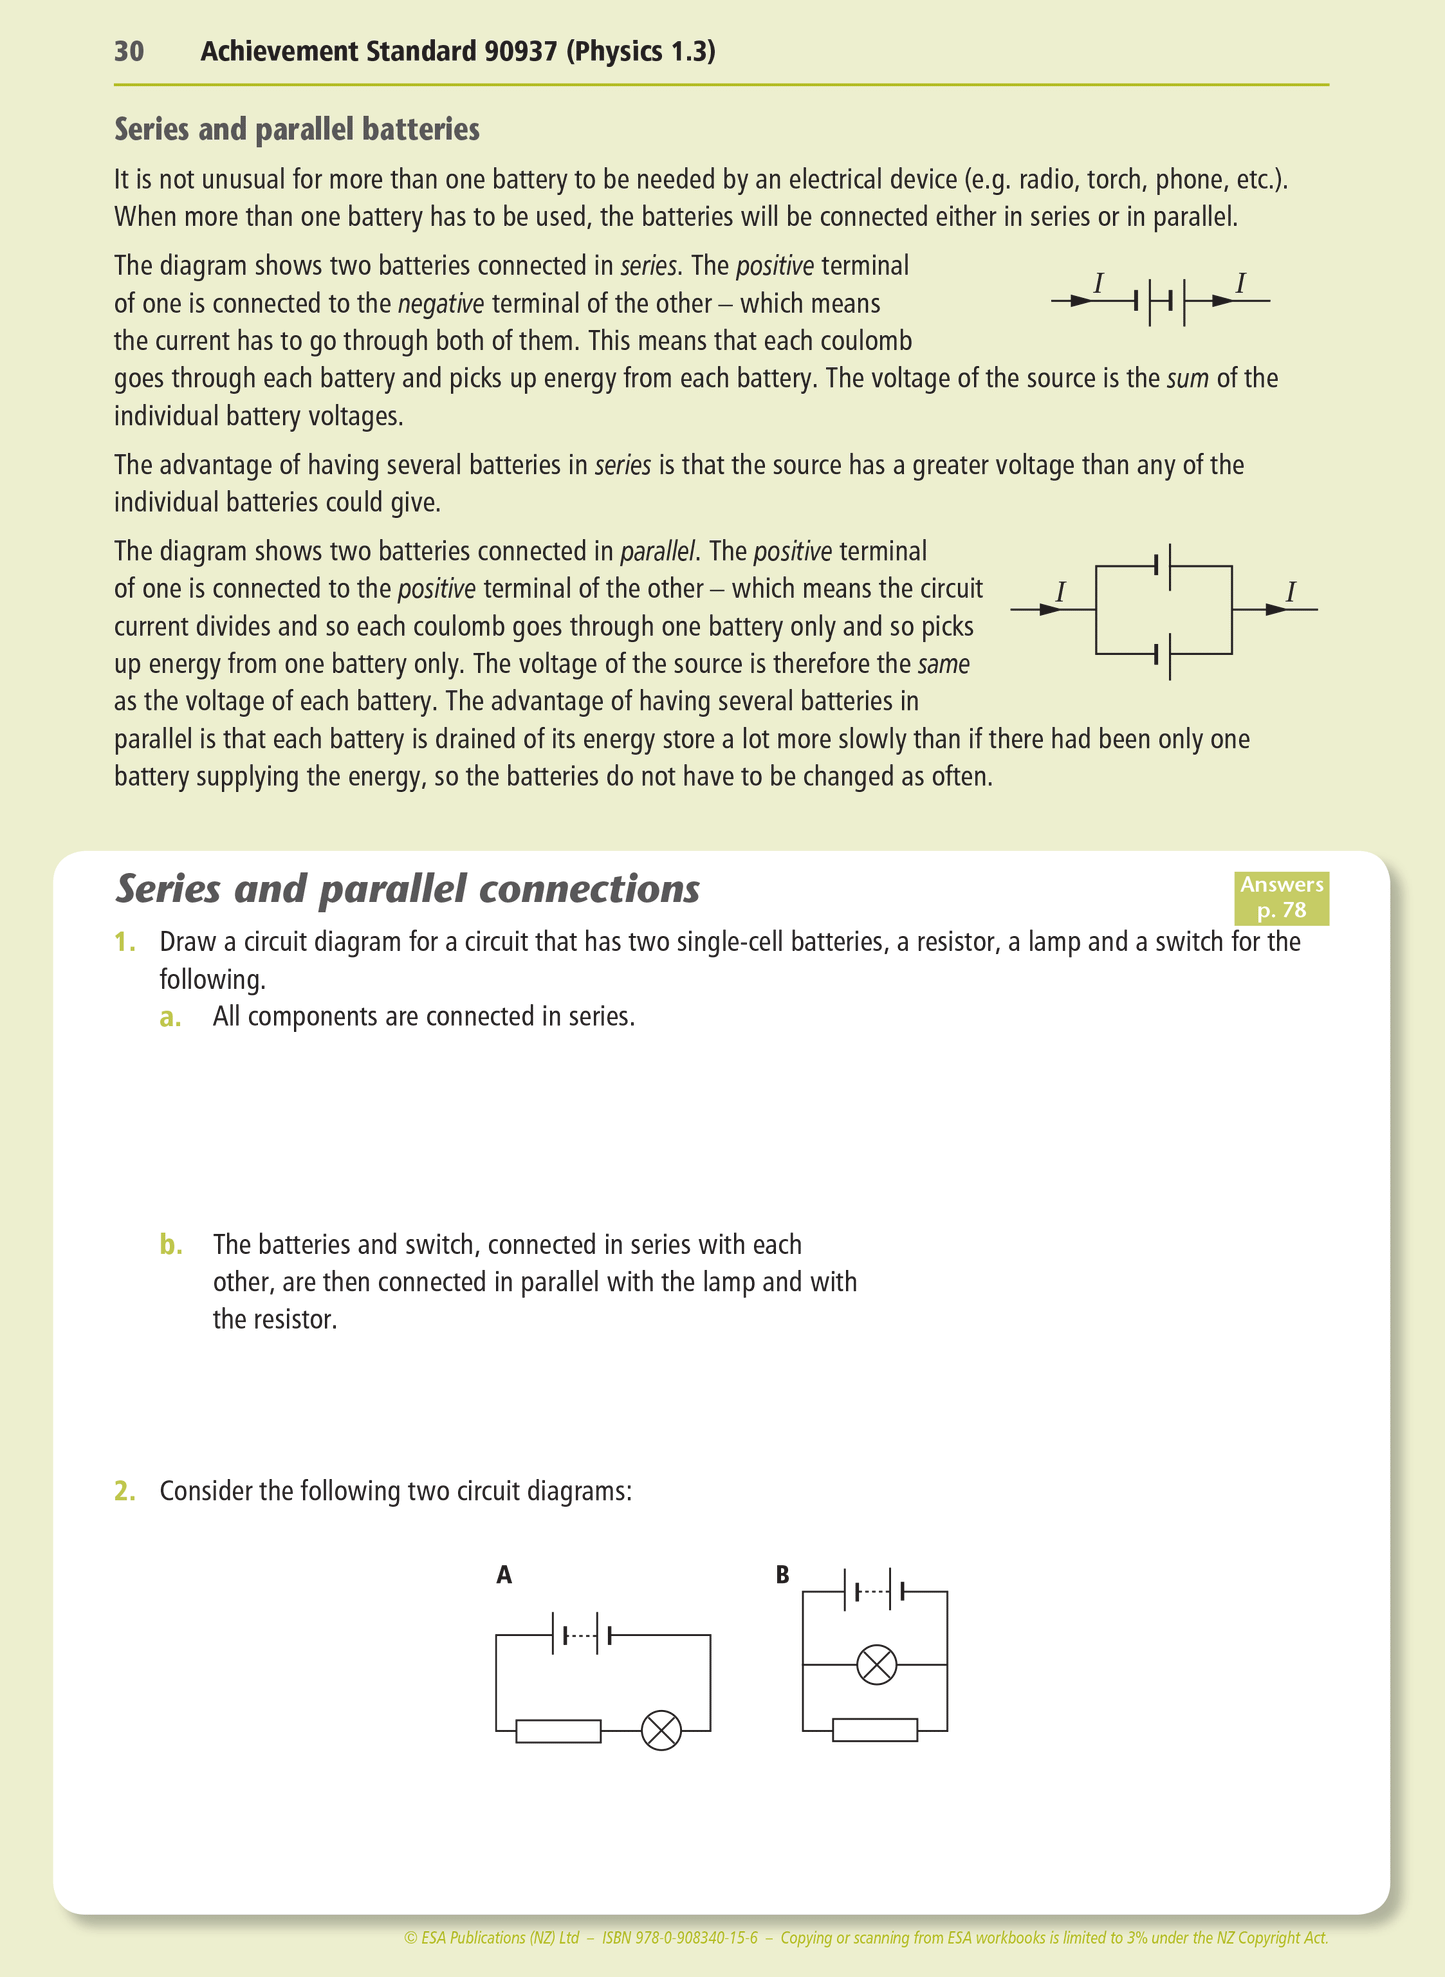 Level 1 Electricity and Magnetism 1.3 Learning Workbook